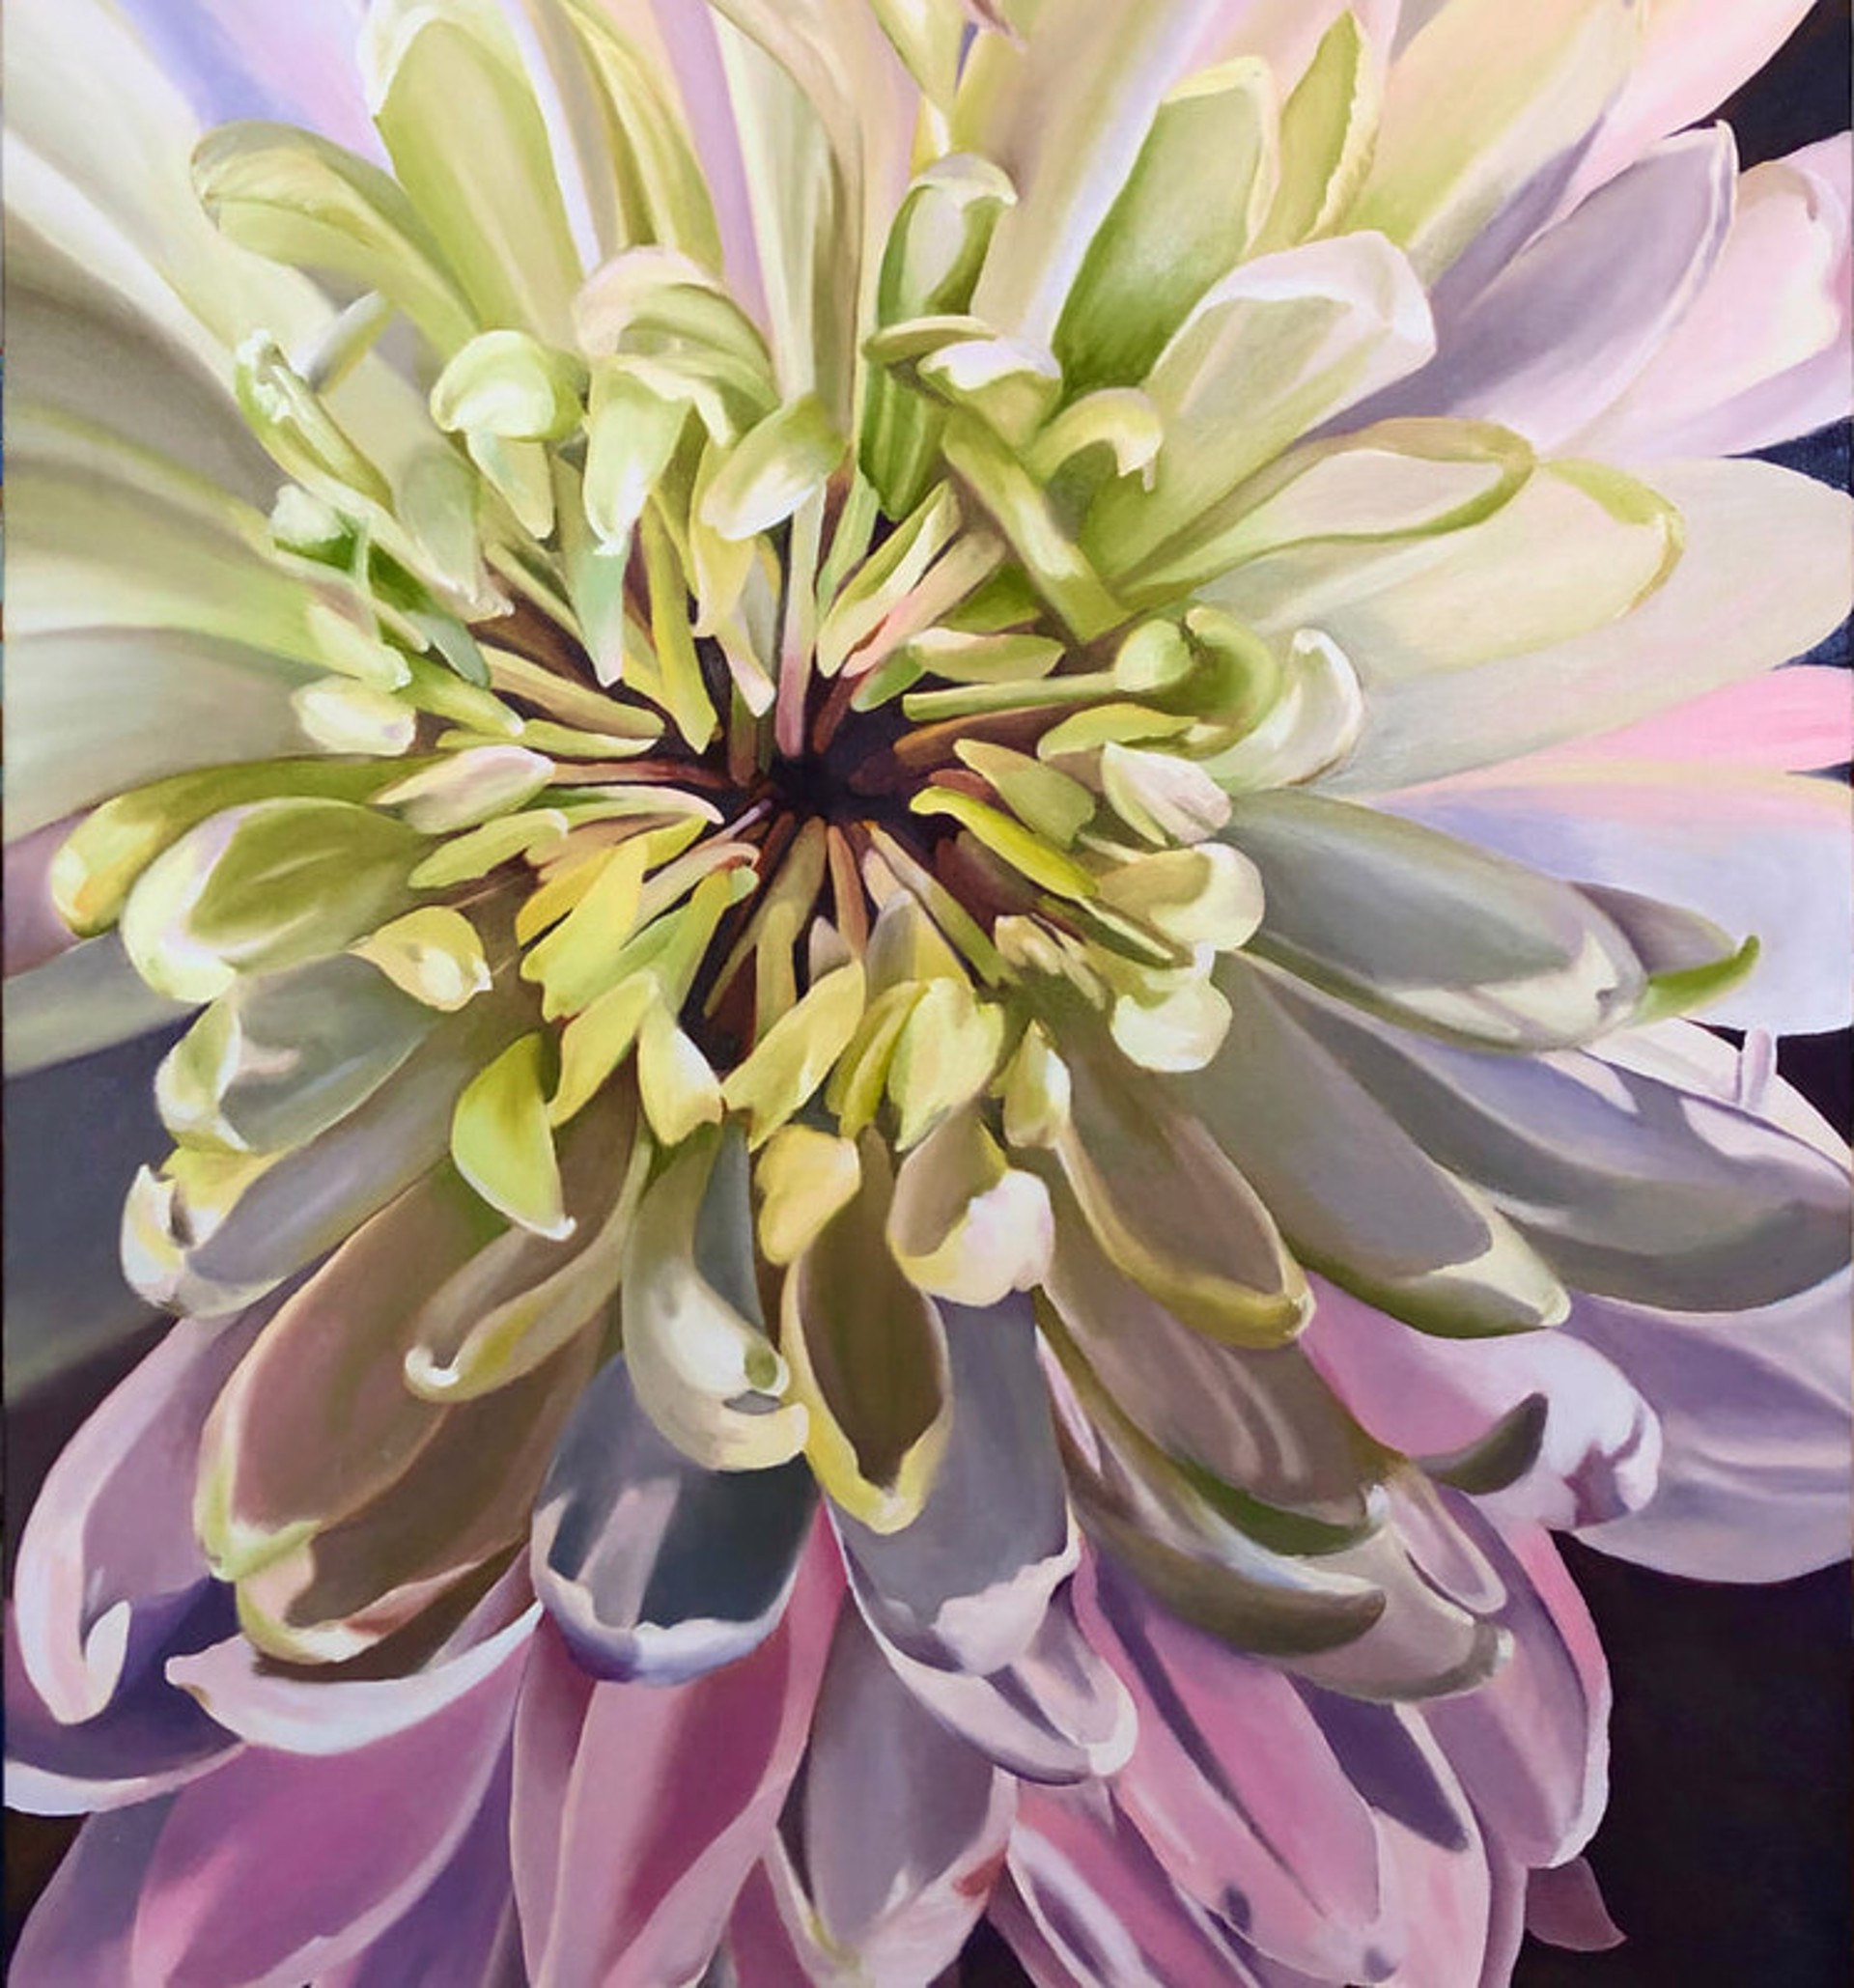 What a Bee Sees - The Chrysanthemum by Jara Fatout Lang